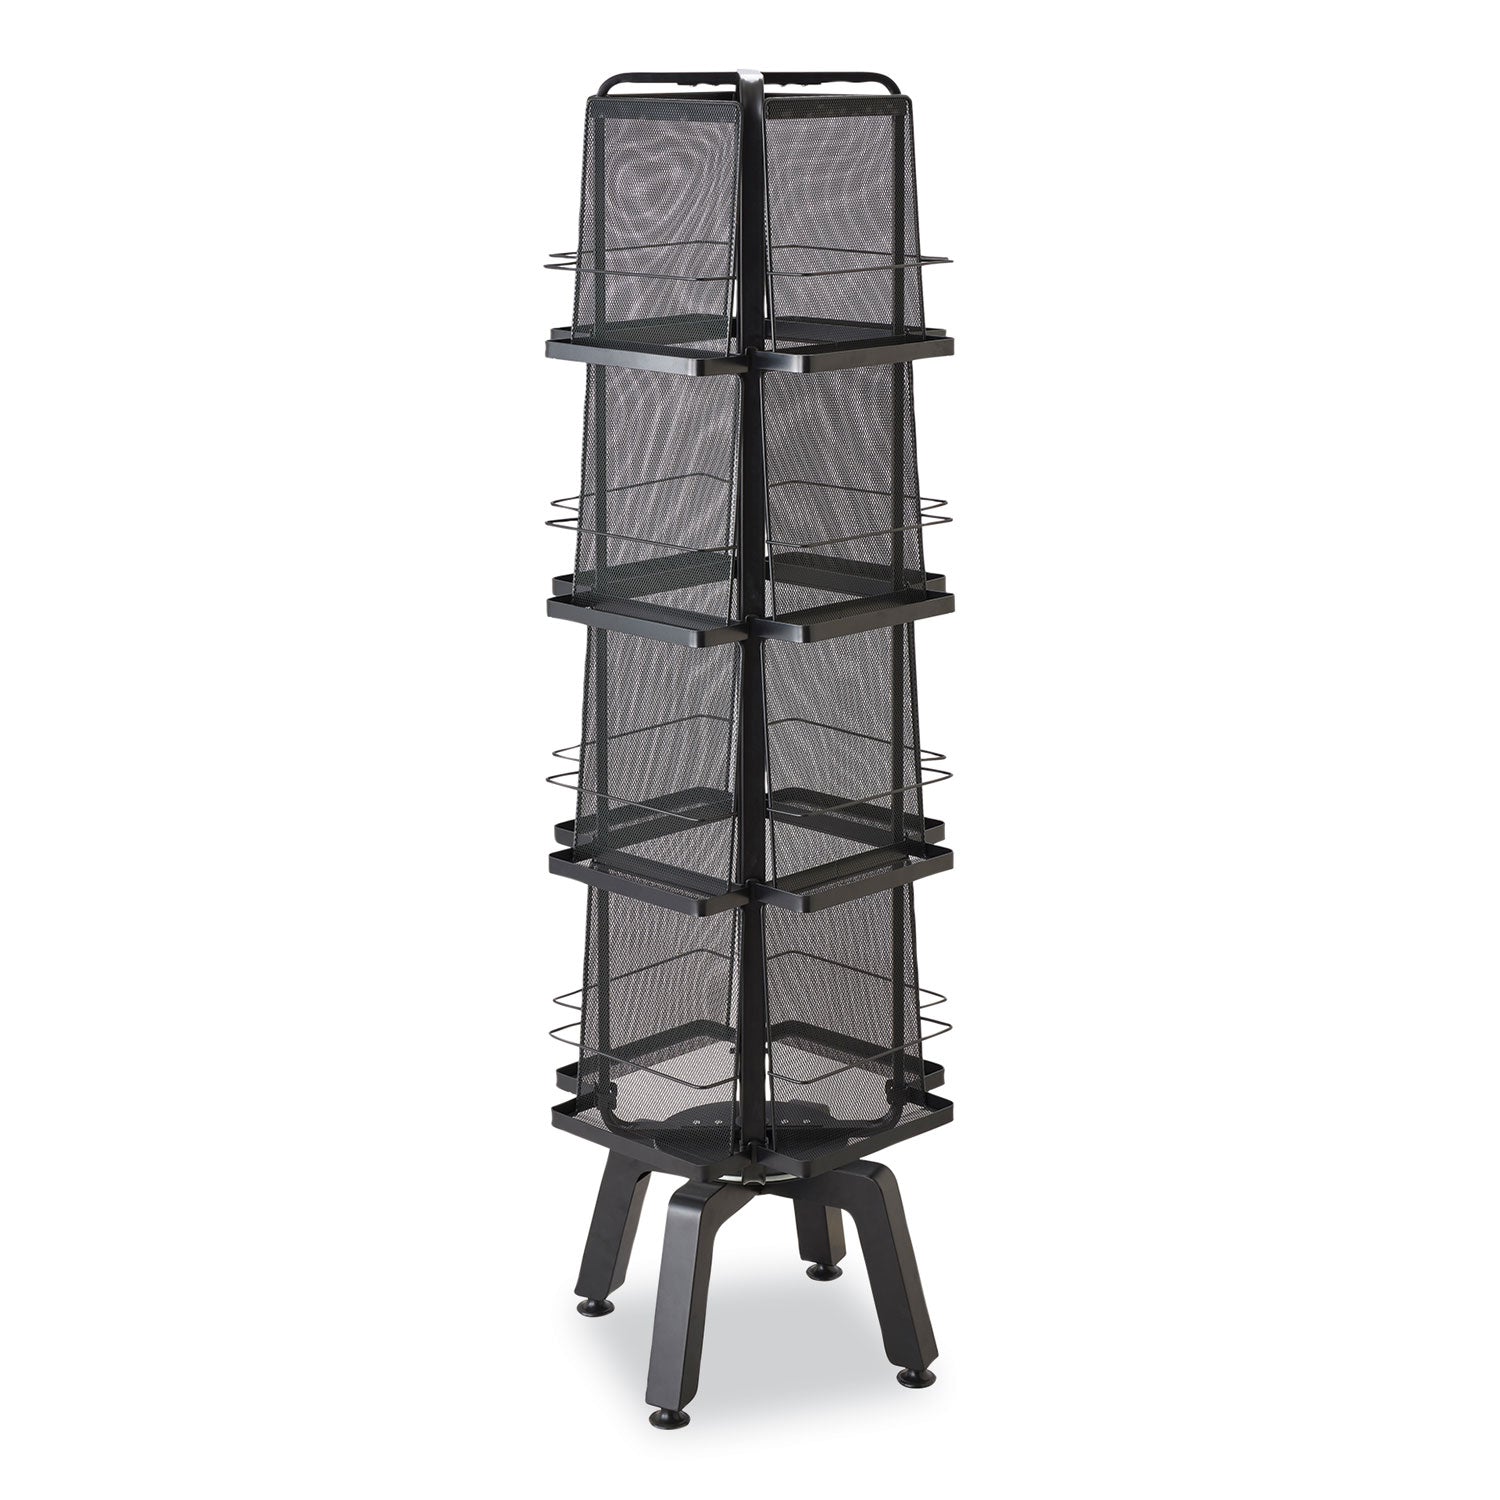 onyx-mesh-rotating-magazine-display-16-compartments-1827w-x-1827d-x-5855h-black-ships-in-1-3-business-days_saf5580bl - 1